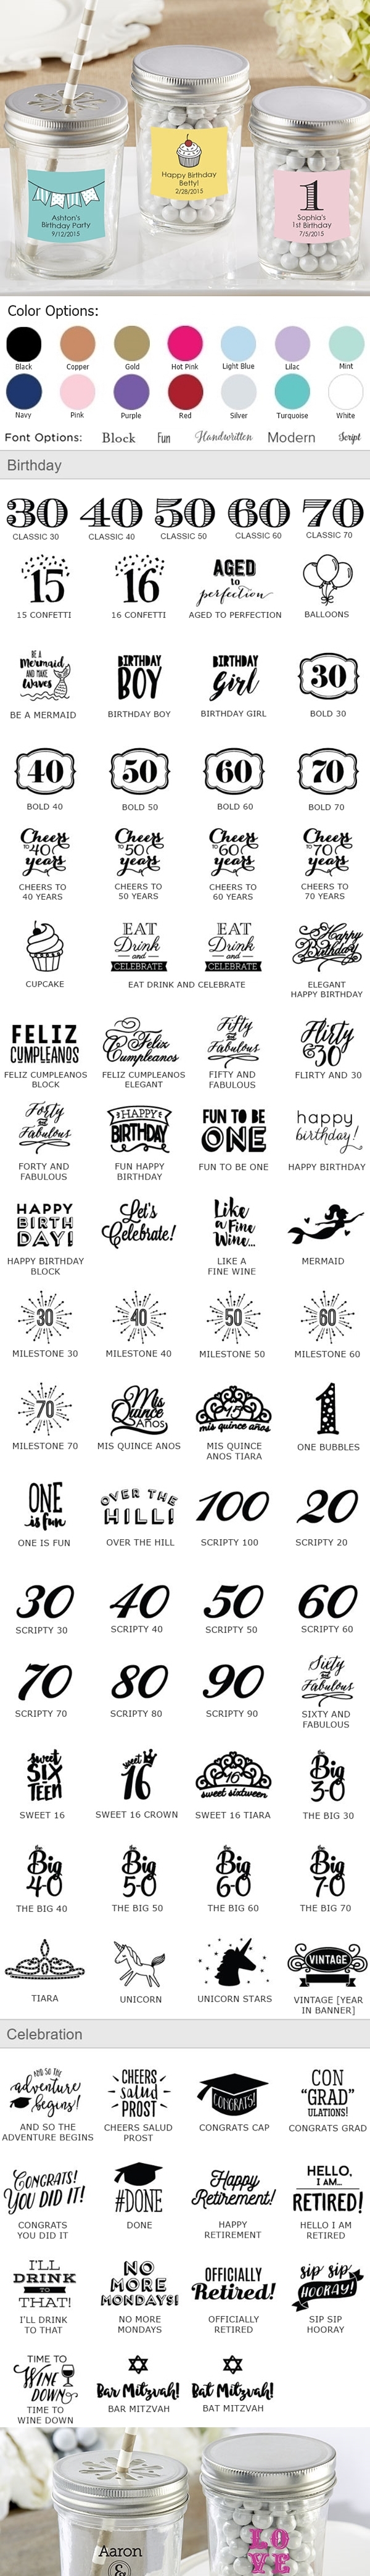 Kate Aspen Personalized Mason Jars with Birthday Designs (Set of 12)